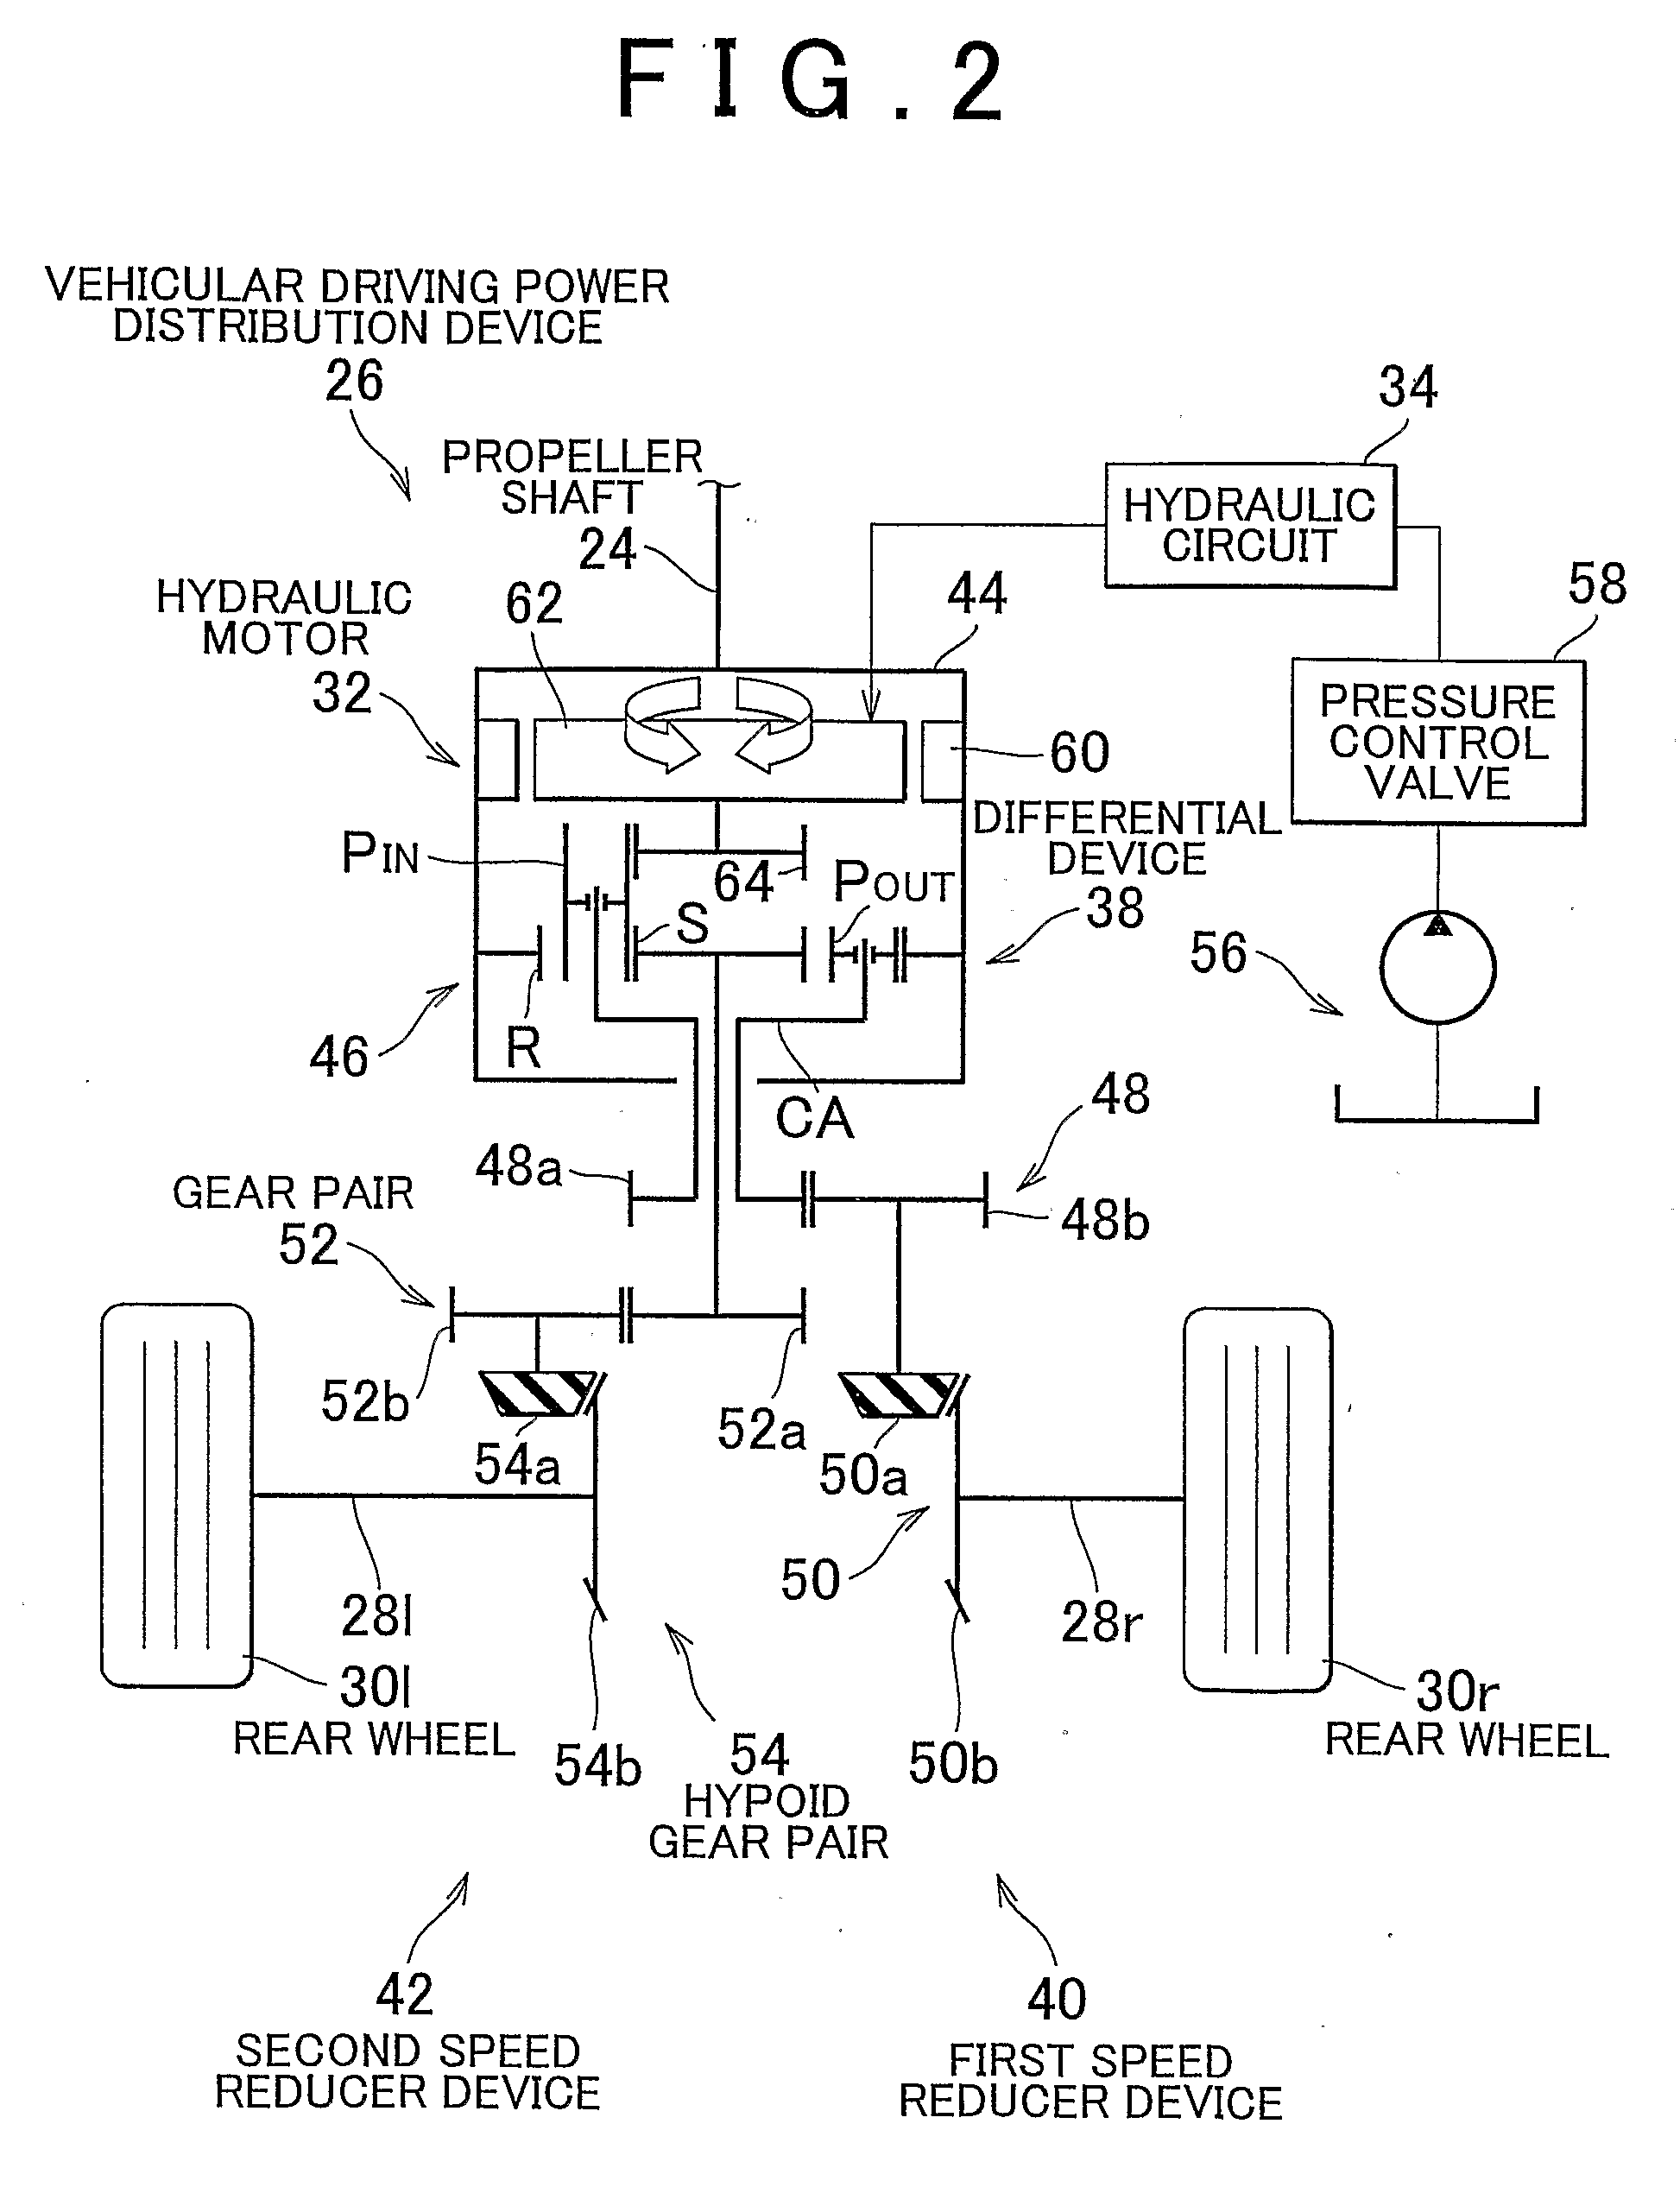 Vehicular driving power distribution device